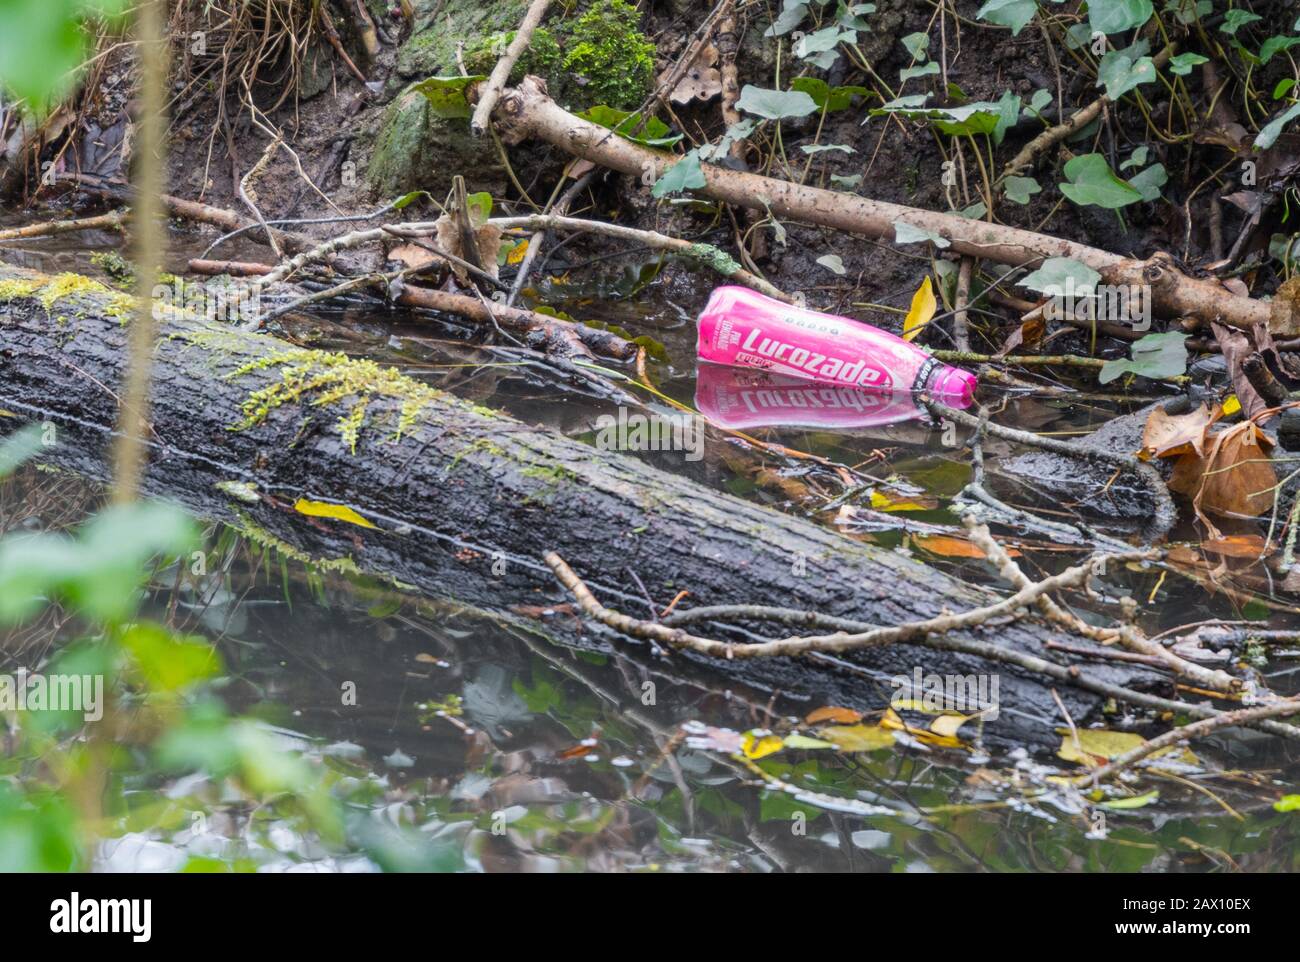 Discarded plastic bottle thrown away, sitting in water in a small stream. Plastic waste pollution. Stock Photo